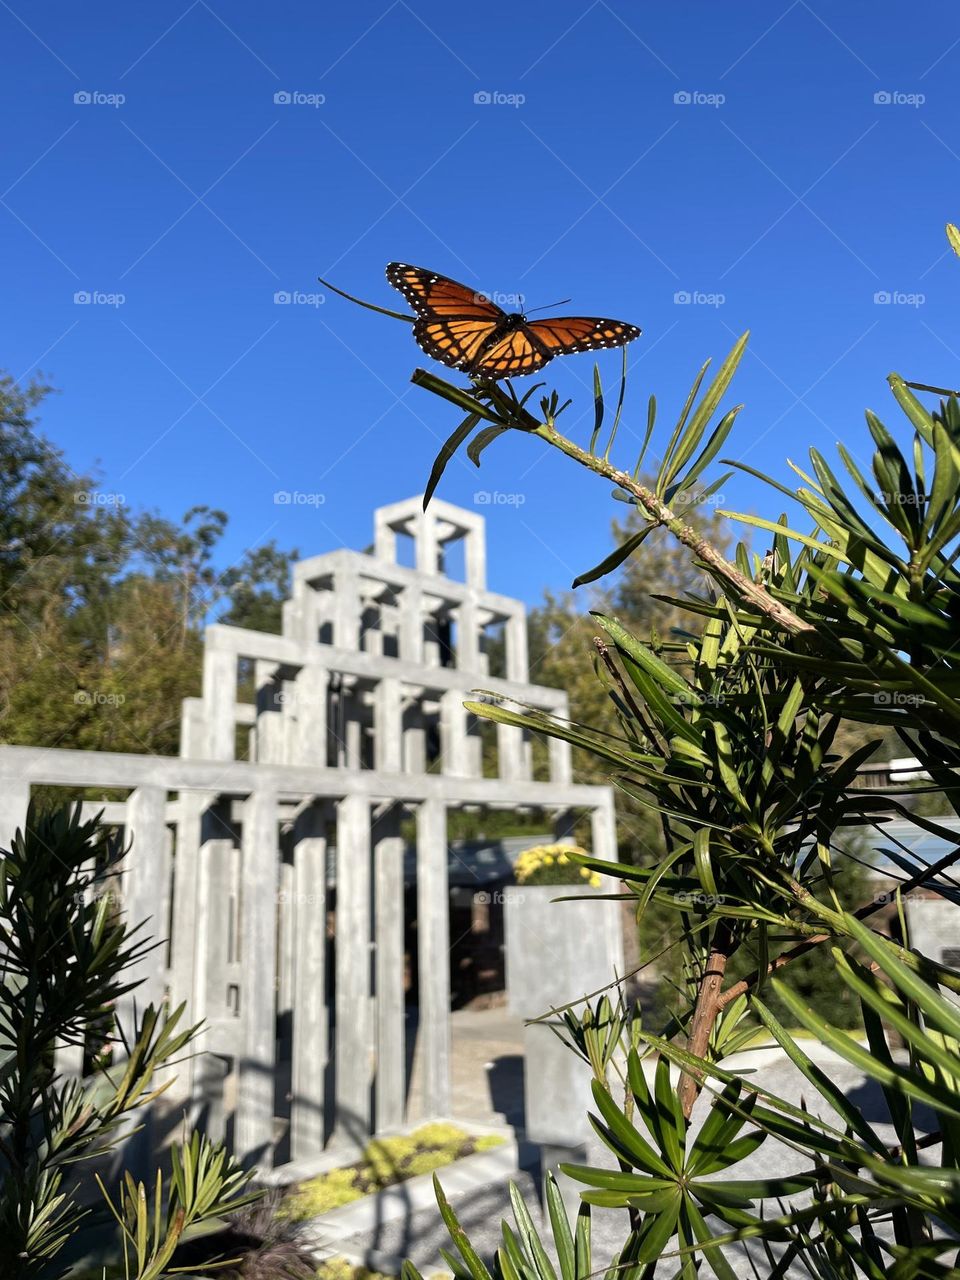 butterfly in the botanical garden in new orleans, statue 